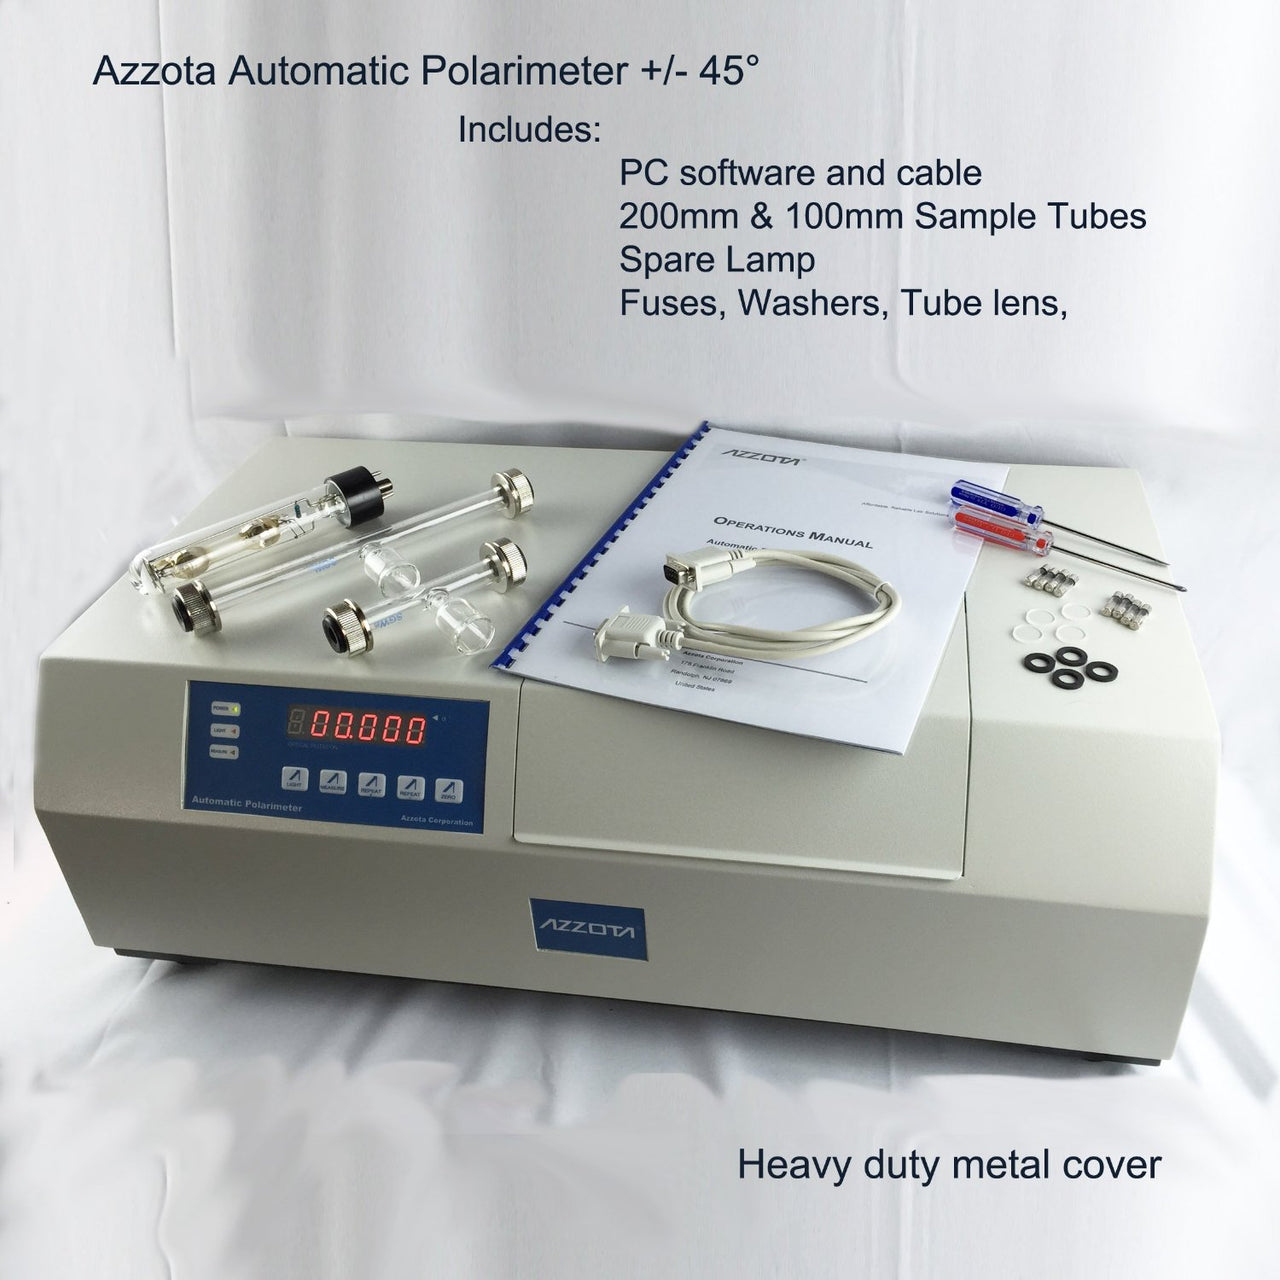 Automatic Polarimeter +/-45' with software includes pc software and cable, 200mm & 100mm sample tubes, spare lamp, fuses, washers, tube lens